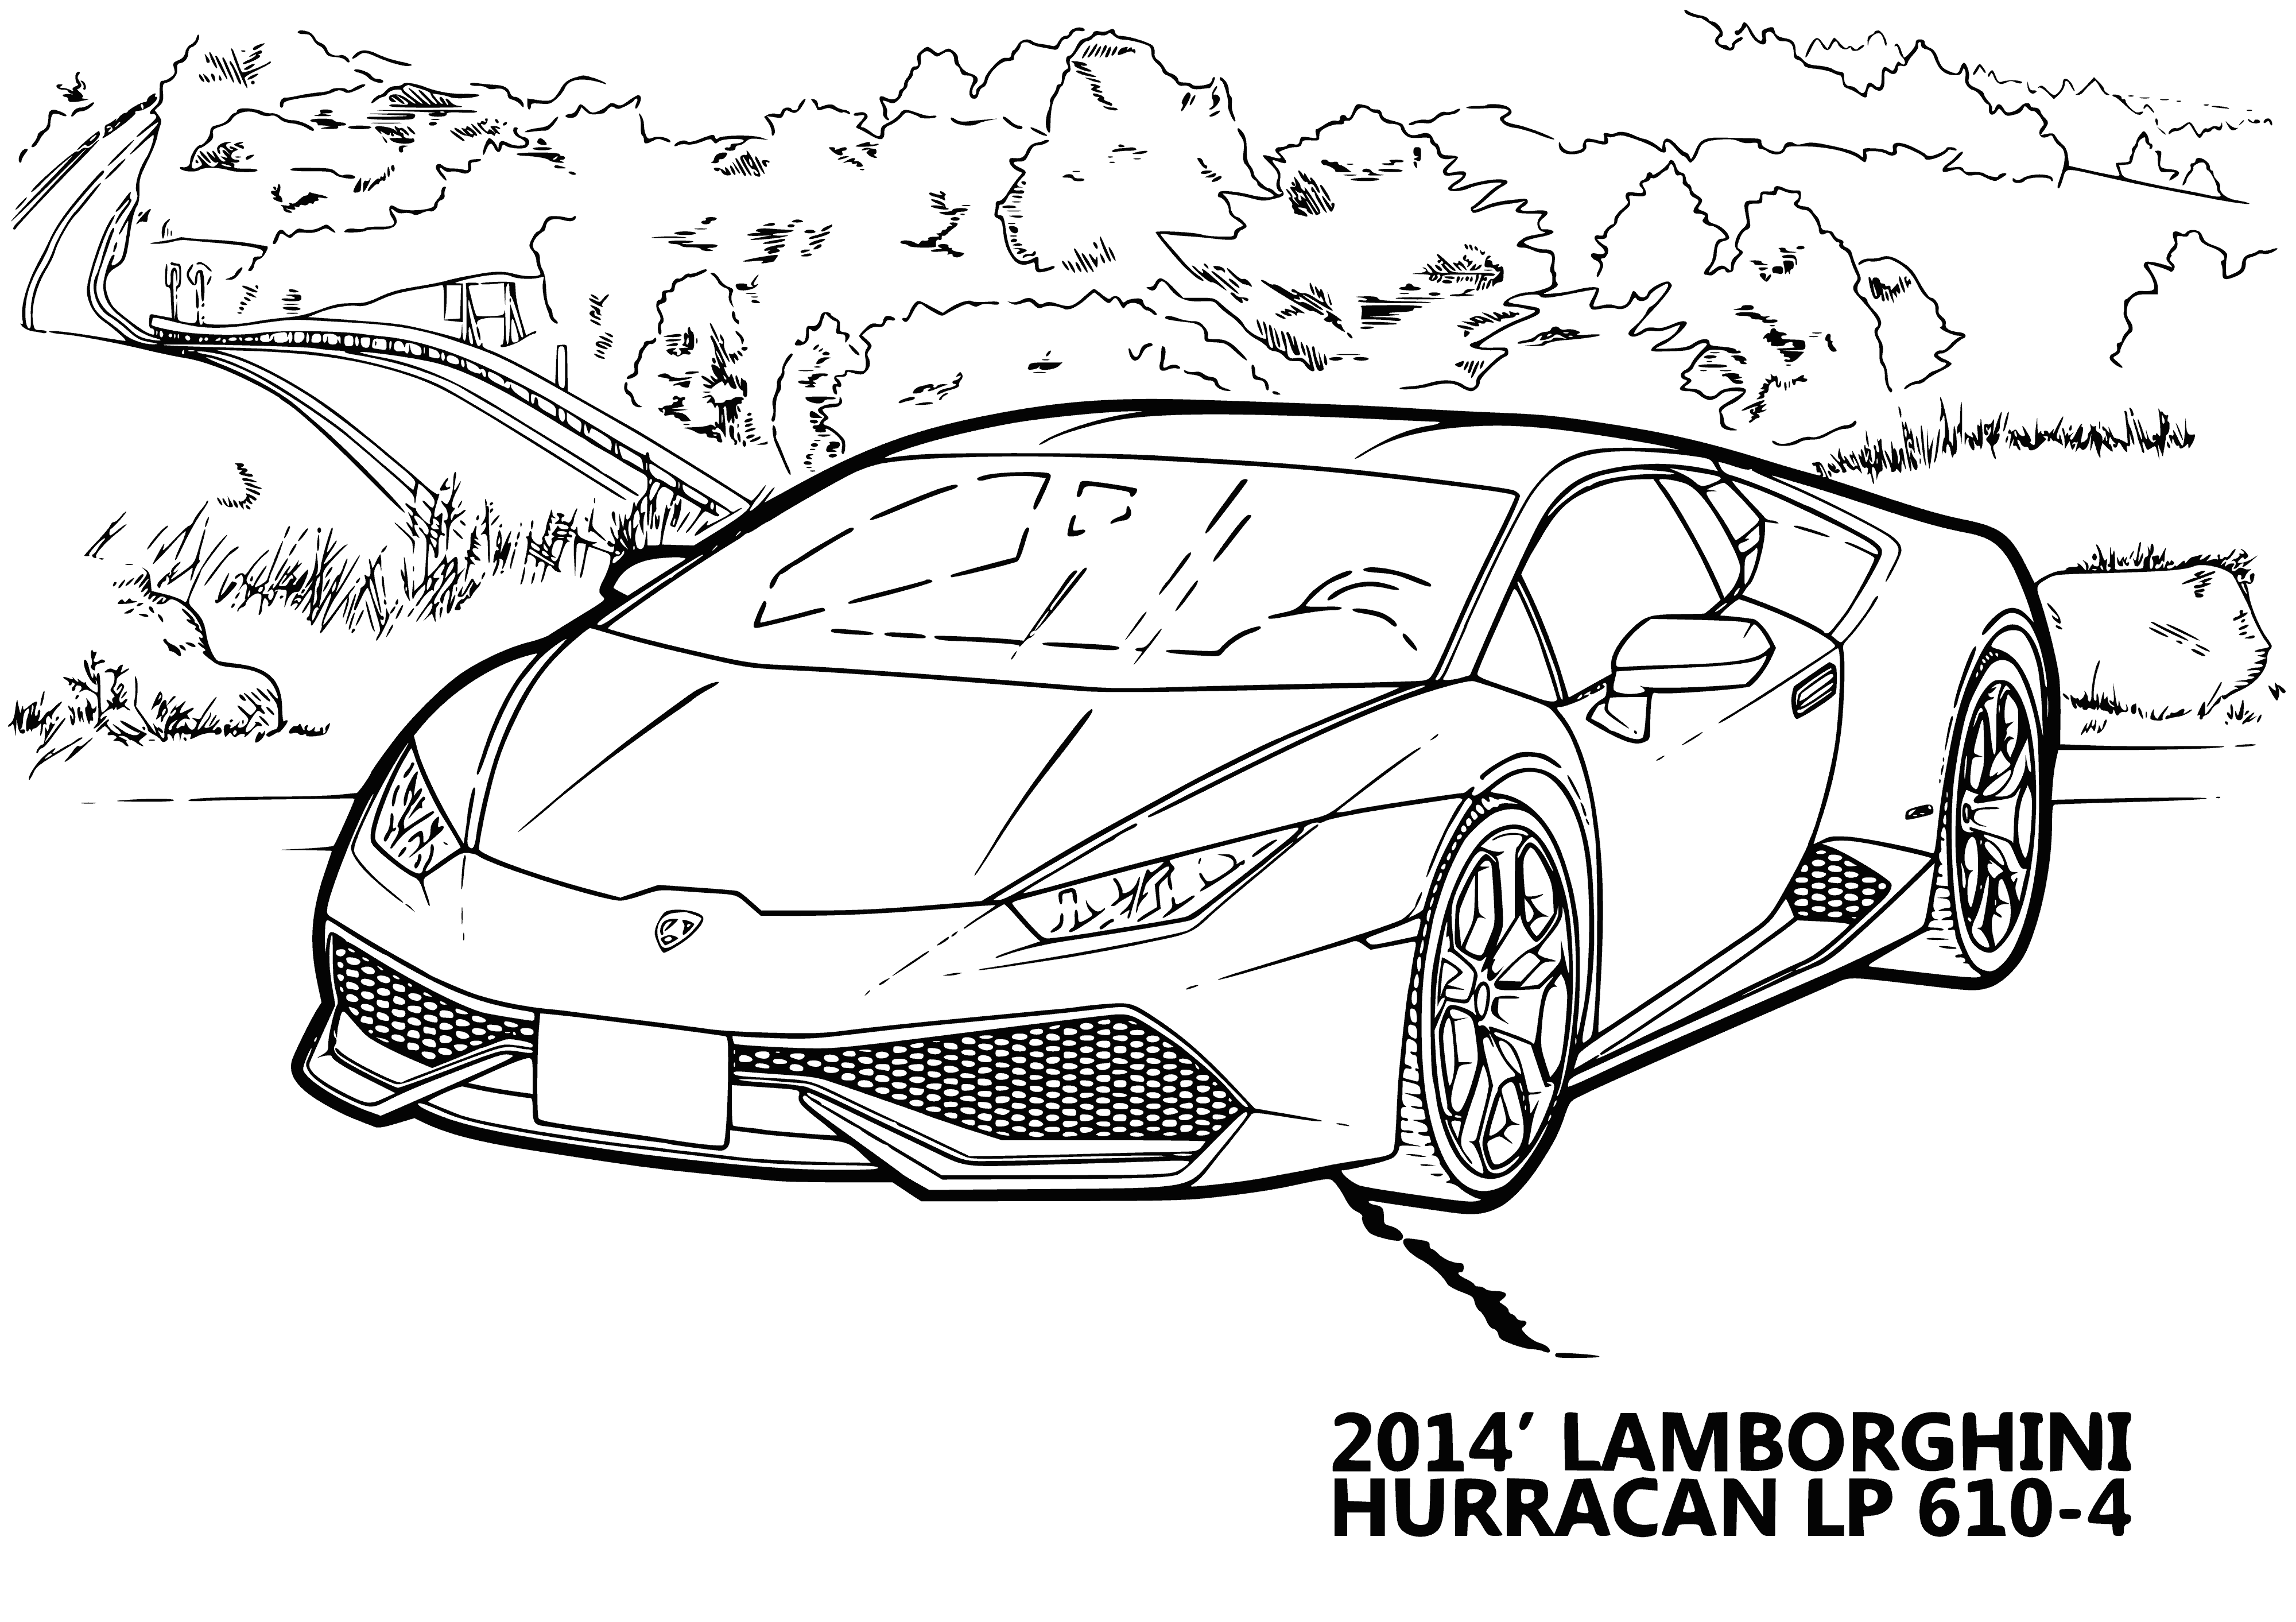 coloring page: Lamborghini Huracan coloring page with sharp angles, sleek thin headlights, scissor doors, gold line and round exhaust pipes sitting on black & gold rims.